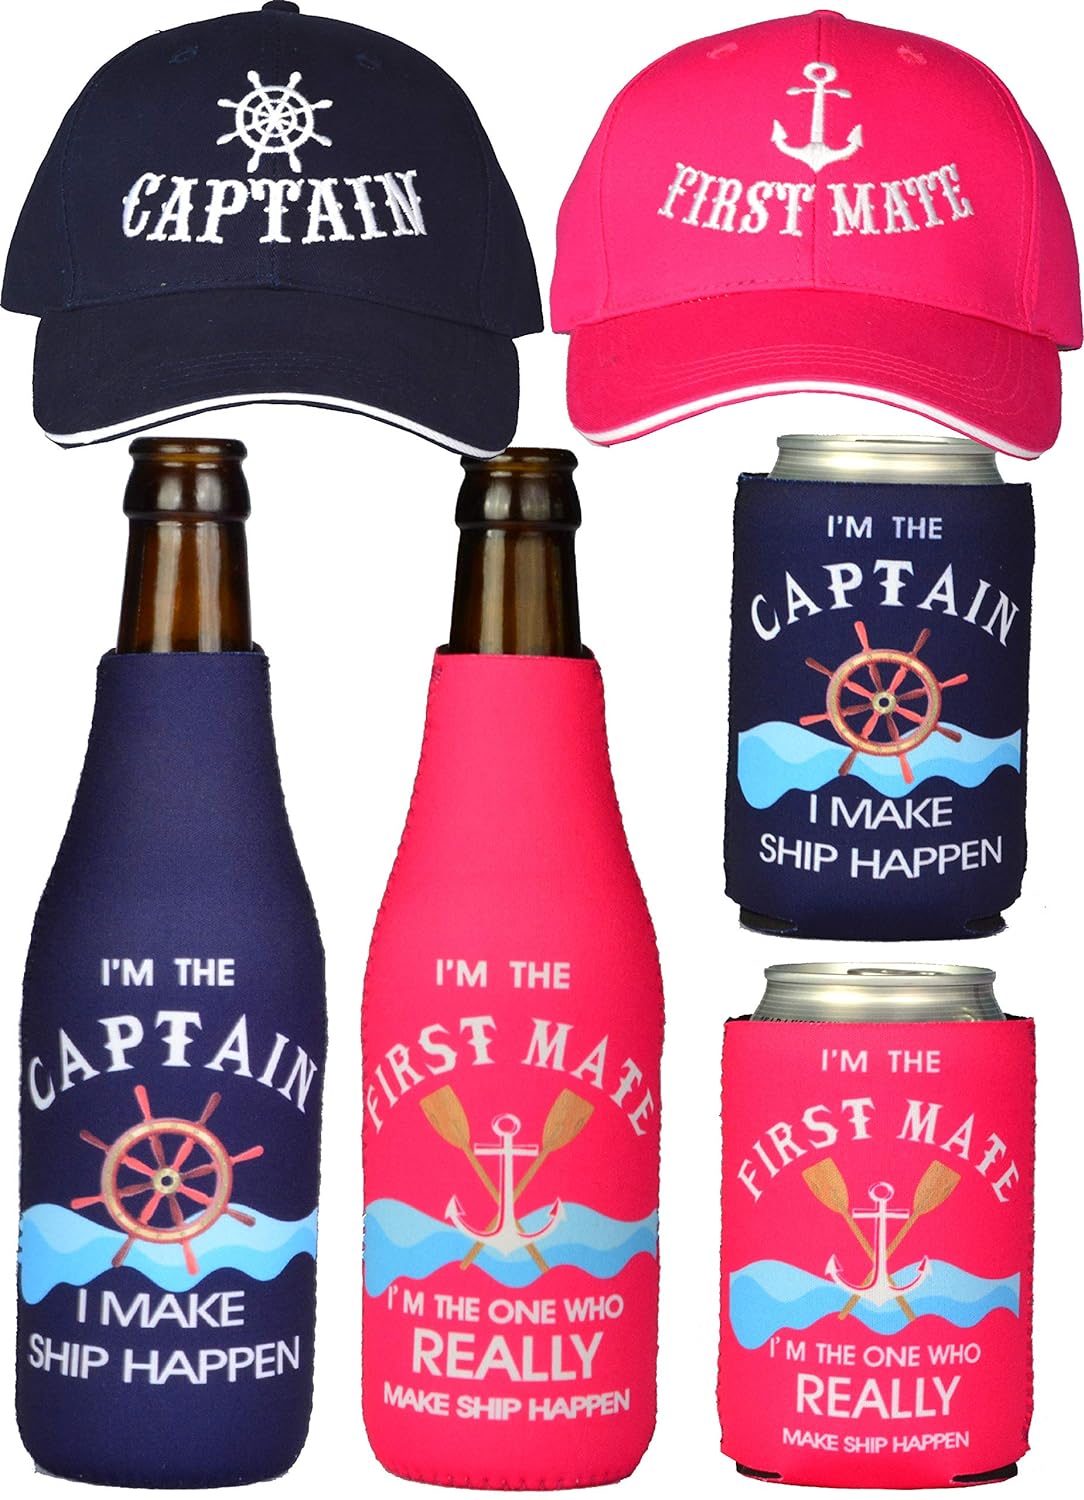 Captain Hats, First Mate Hats, Christmas Gifts,Captain Gifts, First Mate Gifts for Women, Boat Captain Gifts, Gifts for Boaters, Boating Gifts, Boating Gifts for Couple, Nautical Sailing Match